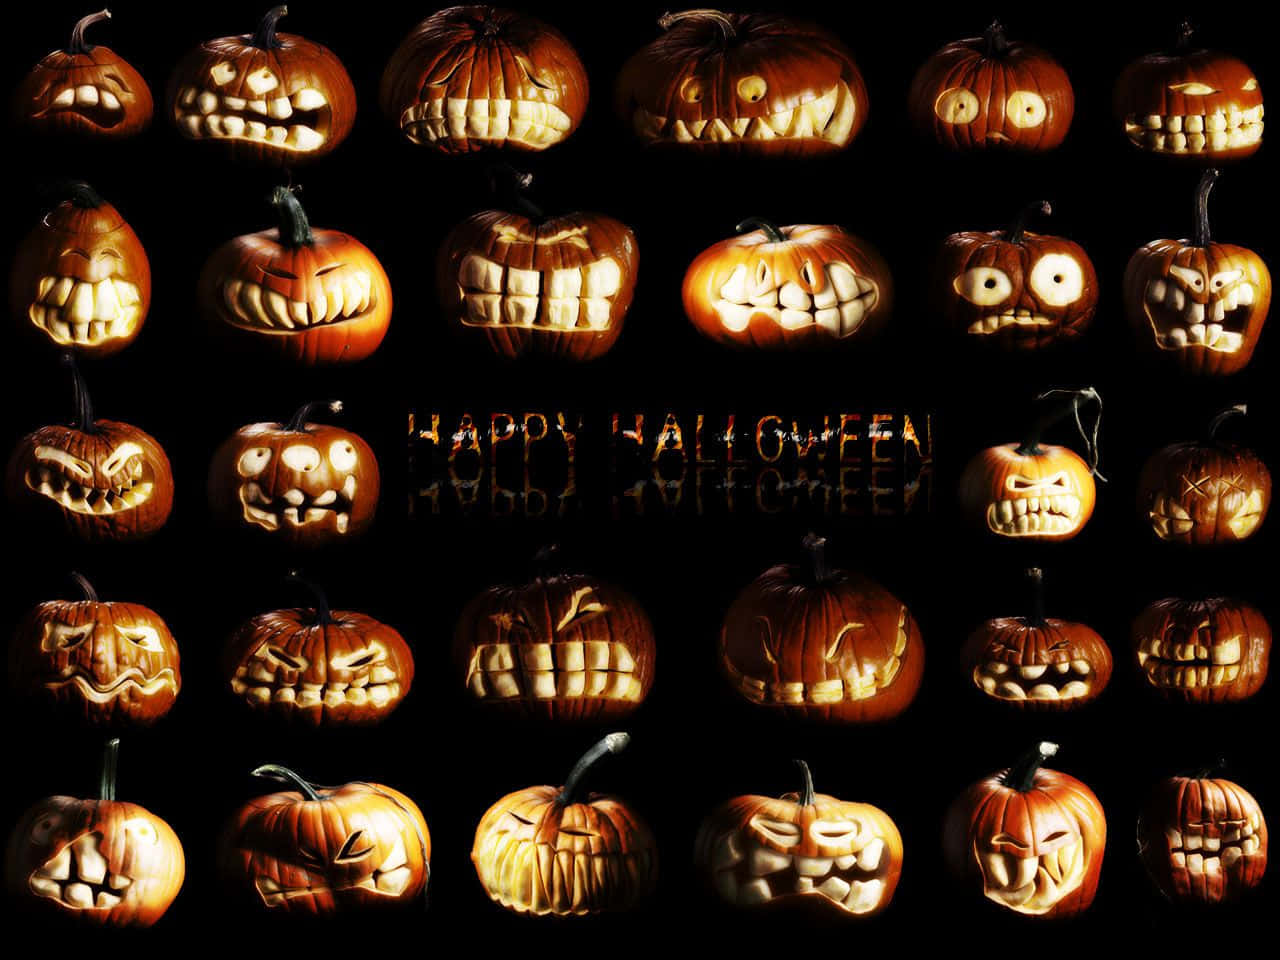 Trick or Treat! The perfect way to celebrate Halloween this year! Wallpaper